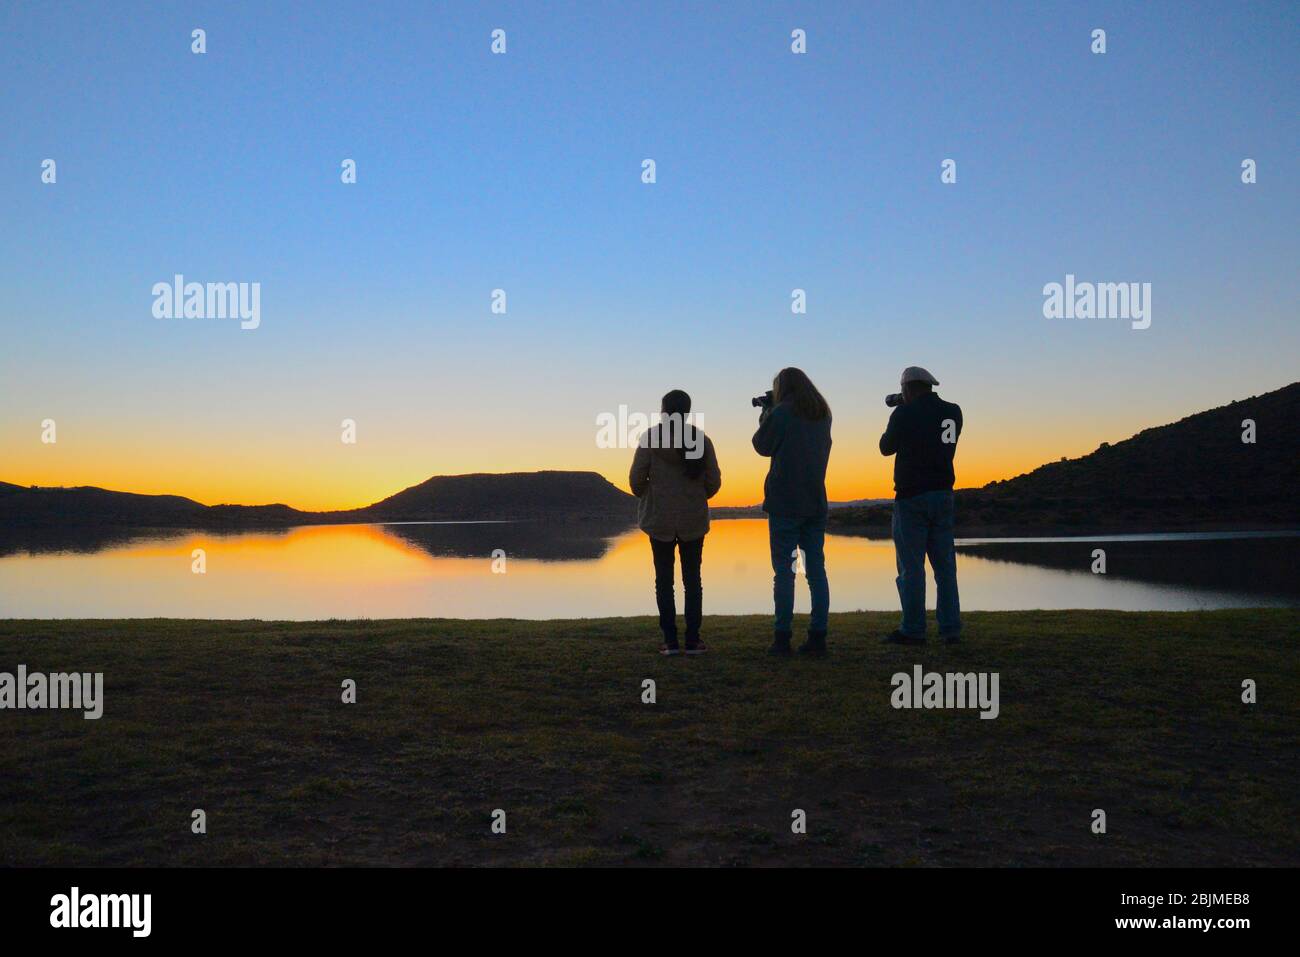 South African outdoor photos by Friedrich von Horsten. Three photographers silhouetted against a dam at sunset Stock Photo